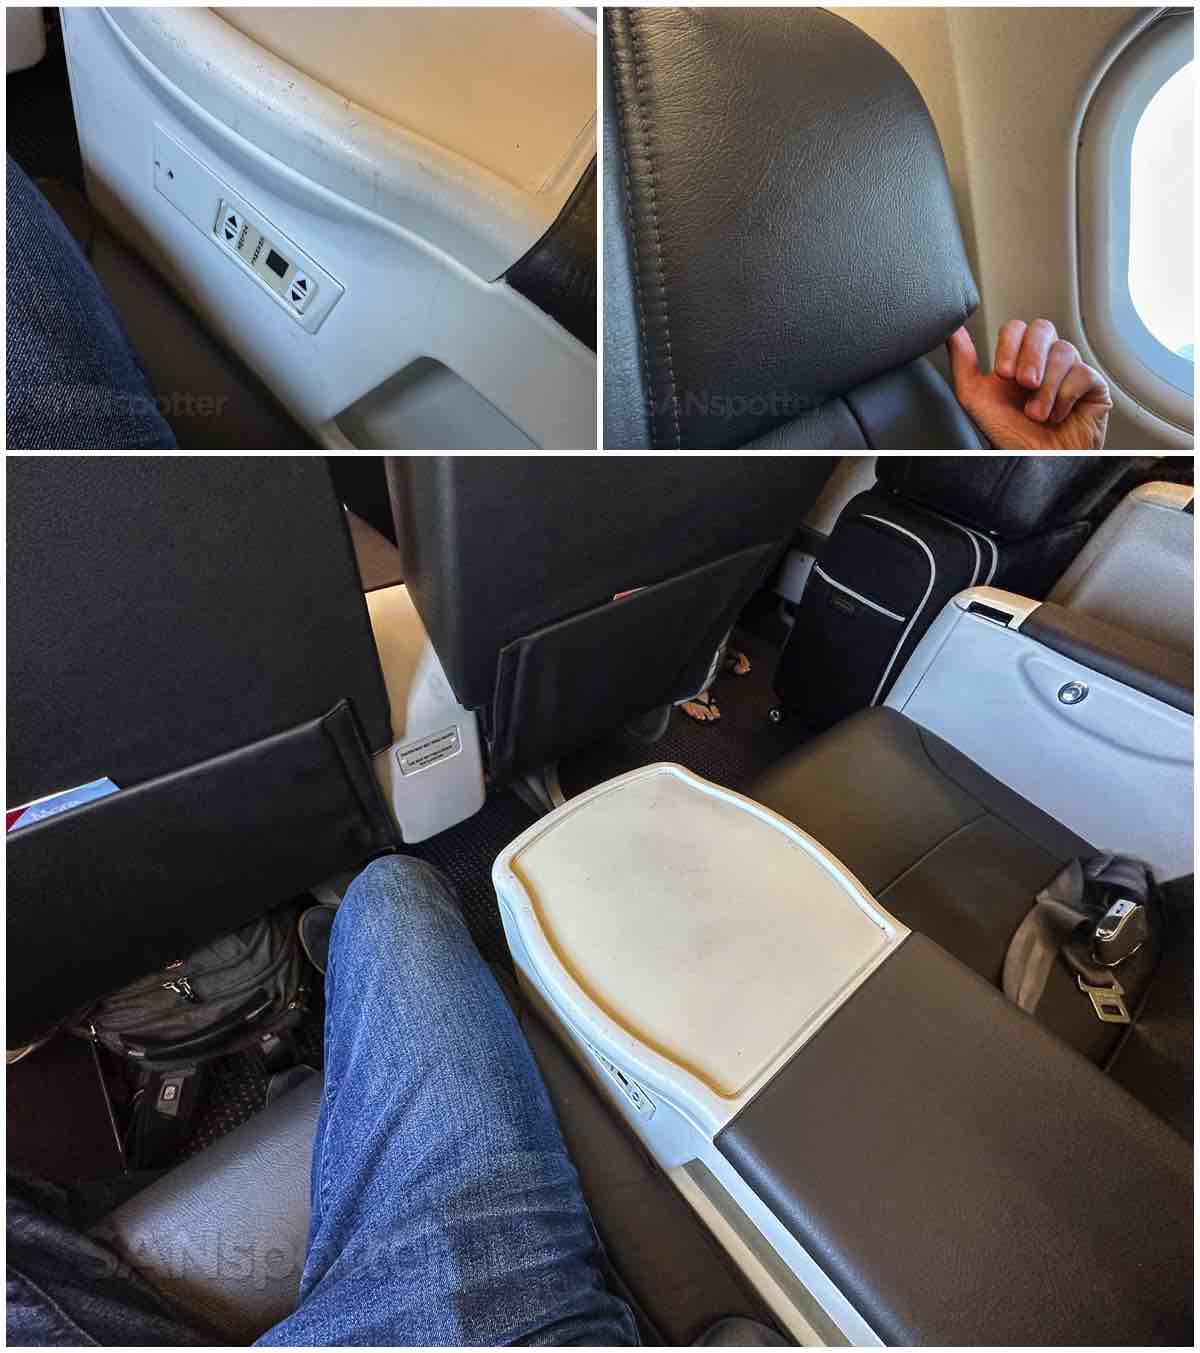 American Airlines A320 first class seat center armrest and headrest